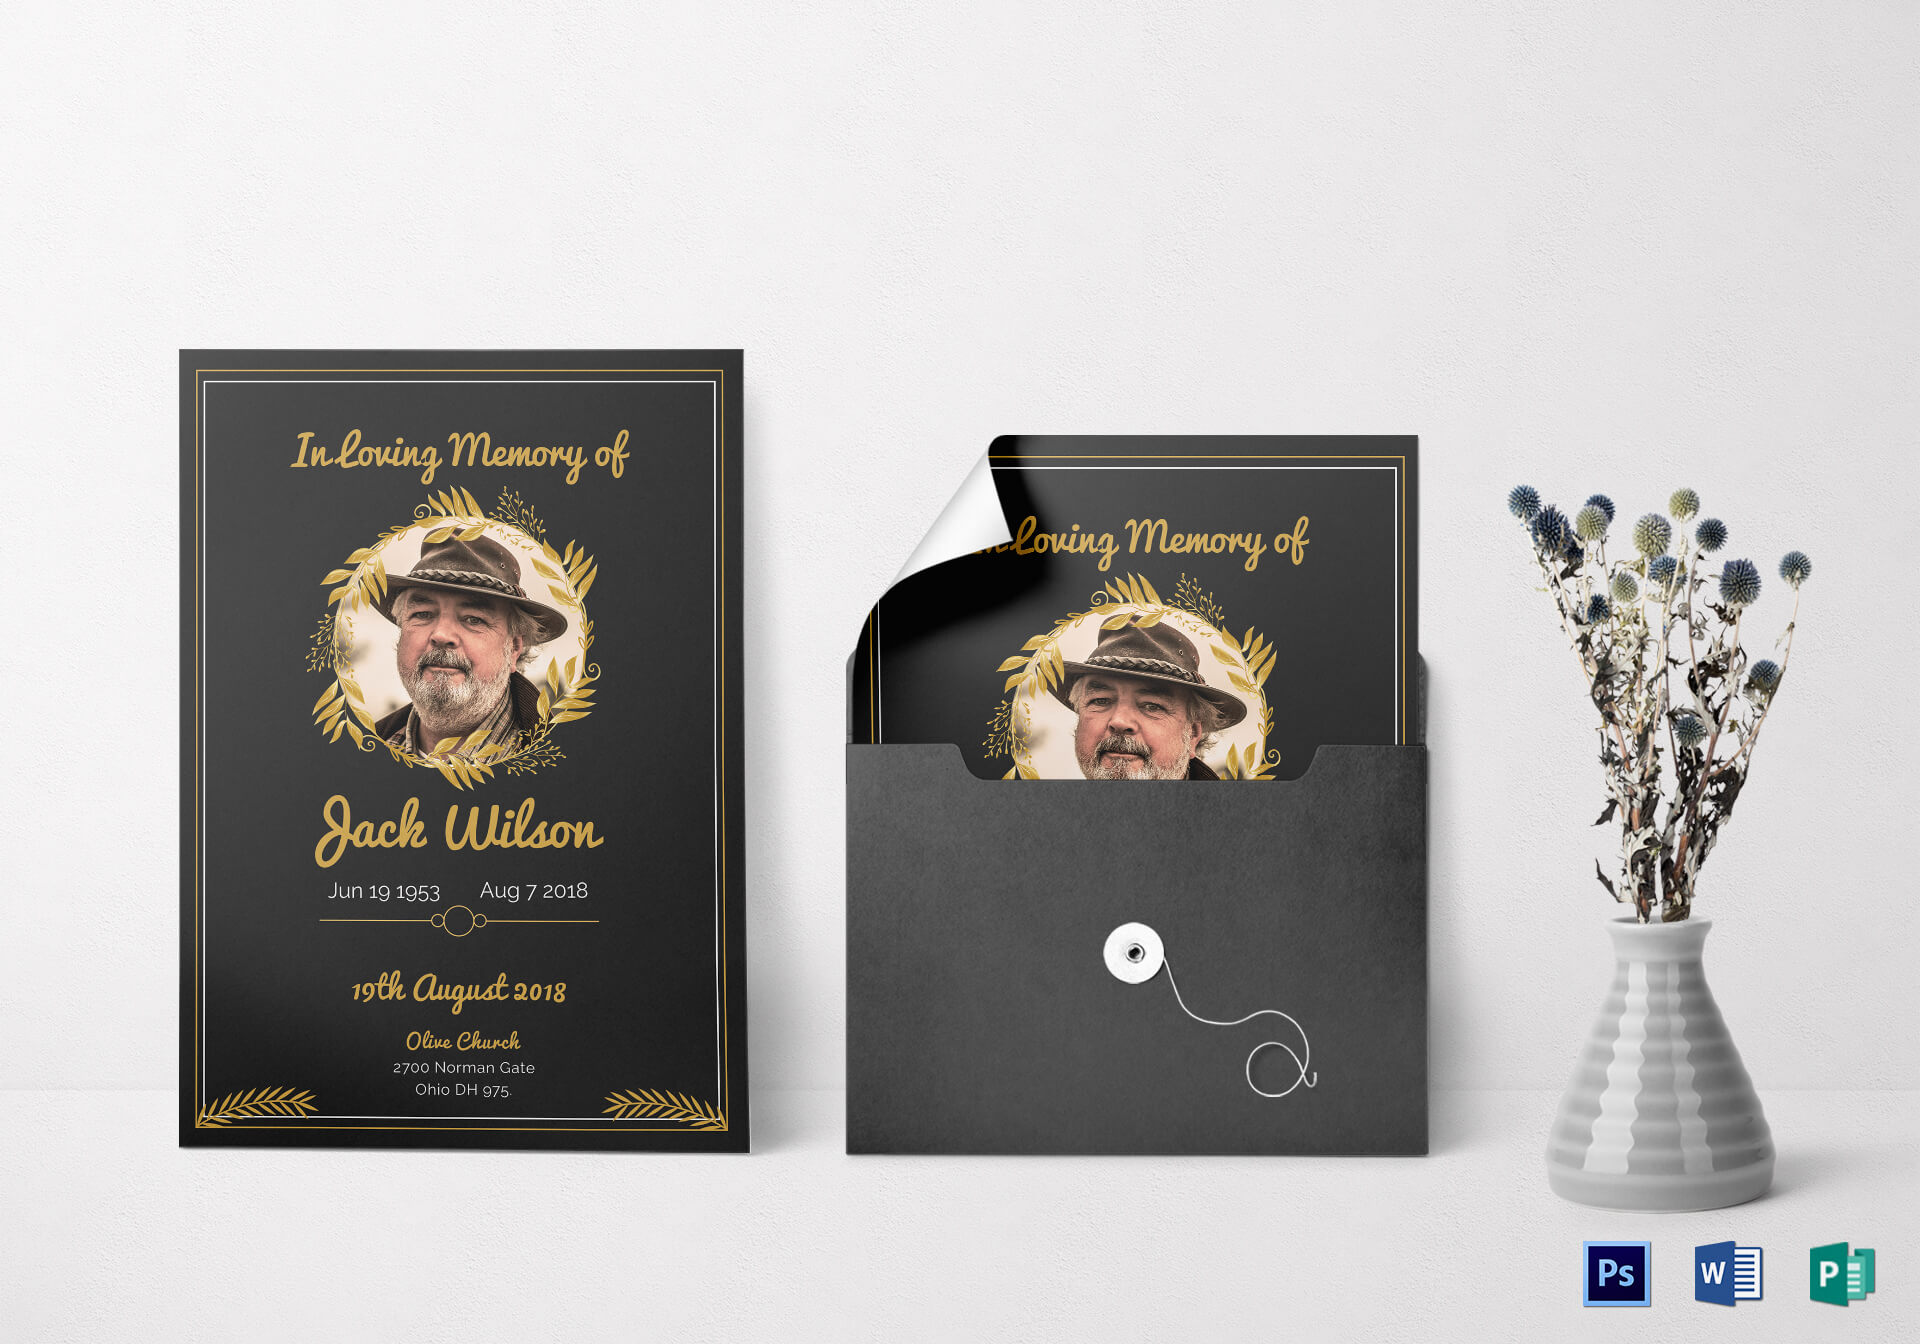 Funeral Invitation Card Template With Regard To Funeral Invitation Card Template